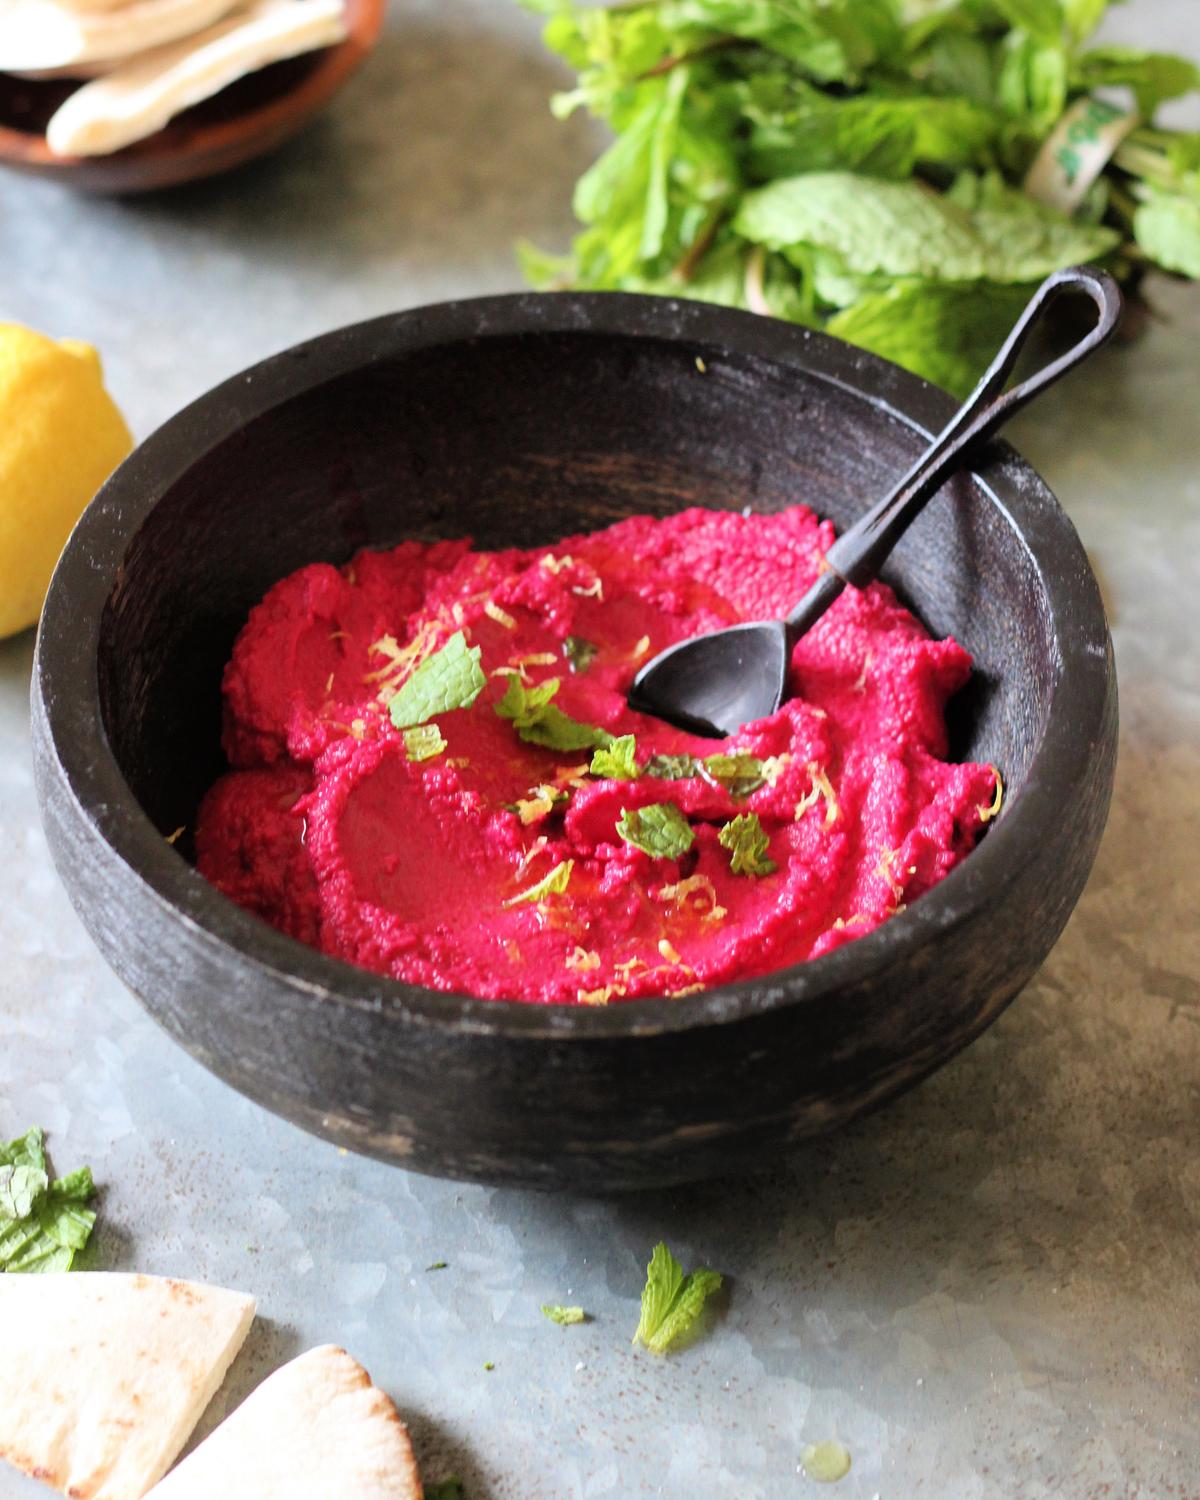 Turn your hummus red for the holidays with healthy and all-natural ingredients. (Lynda Balslev for Tastefood)